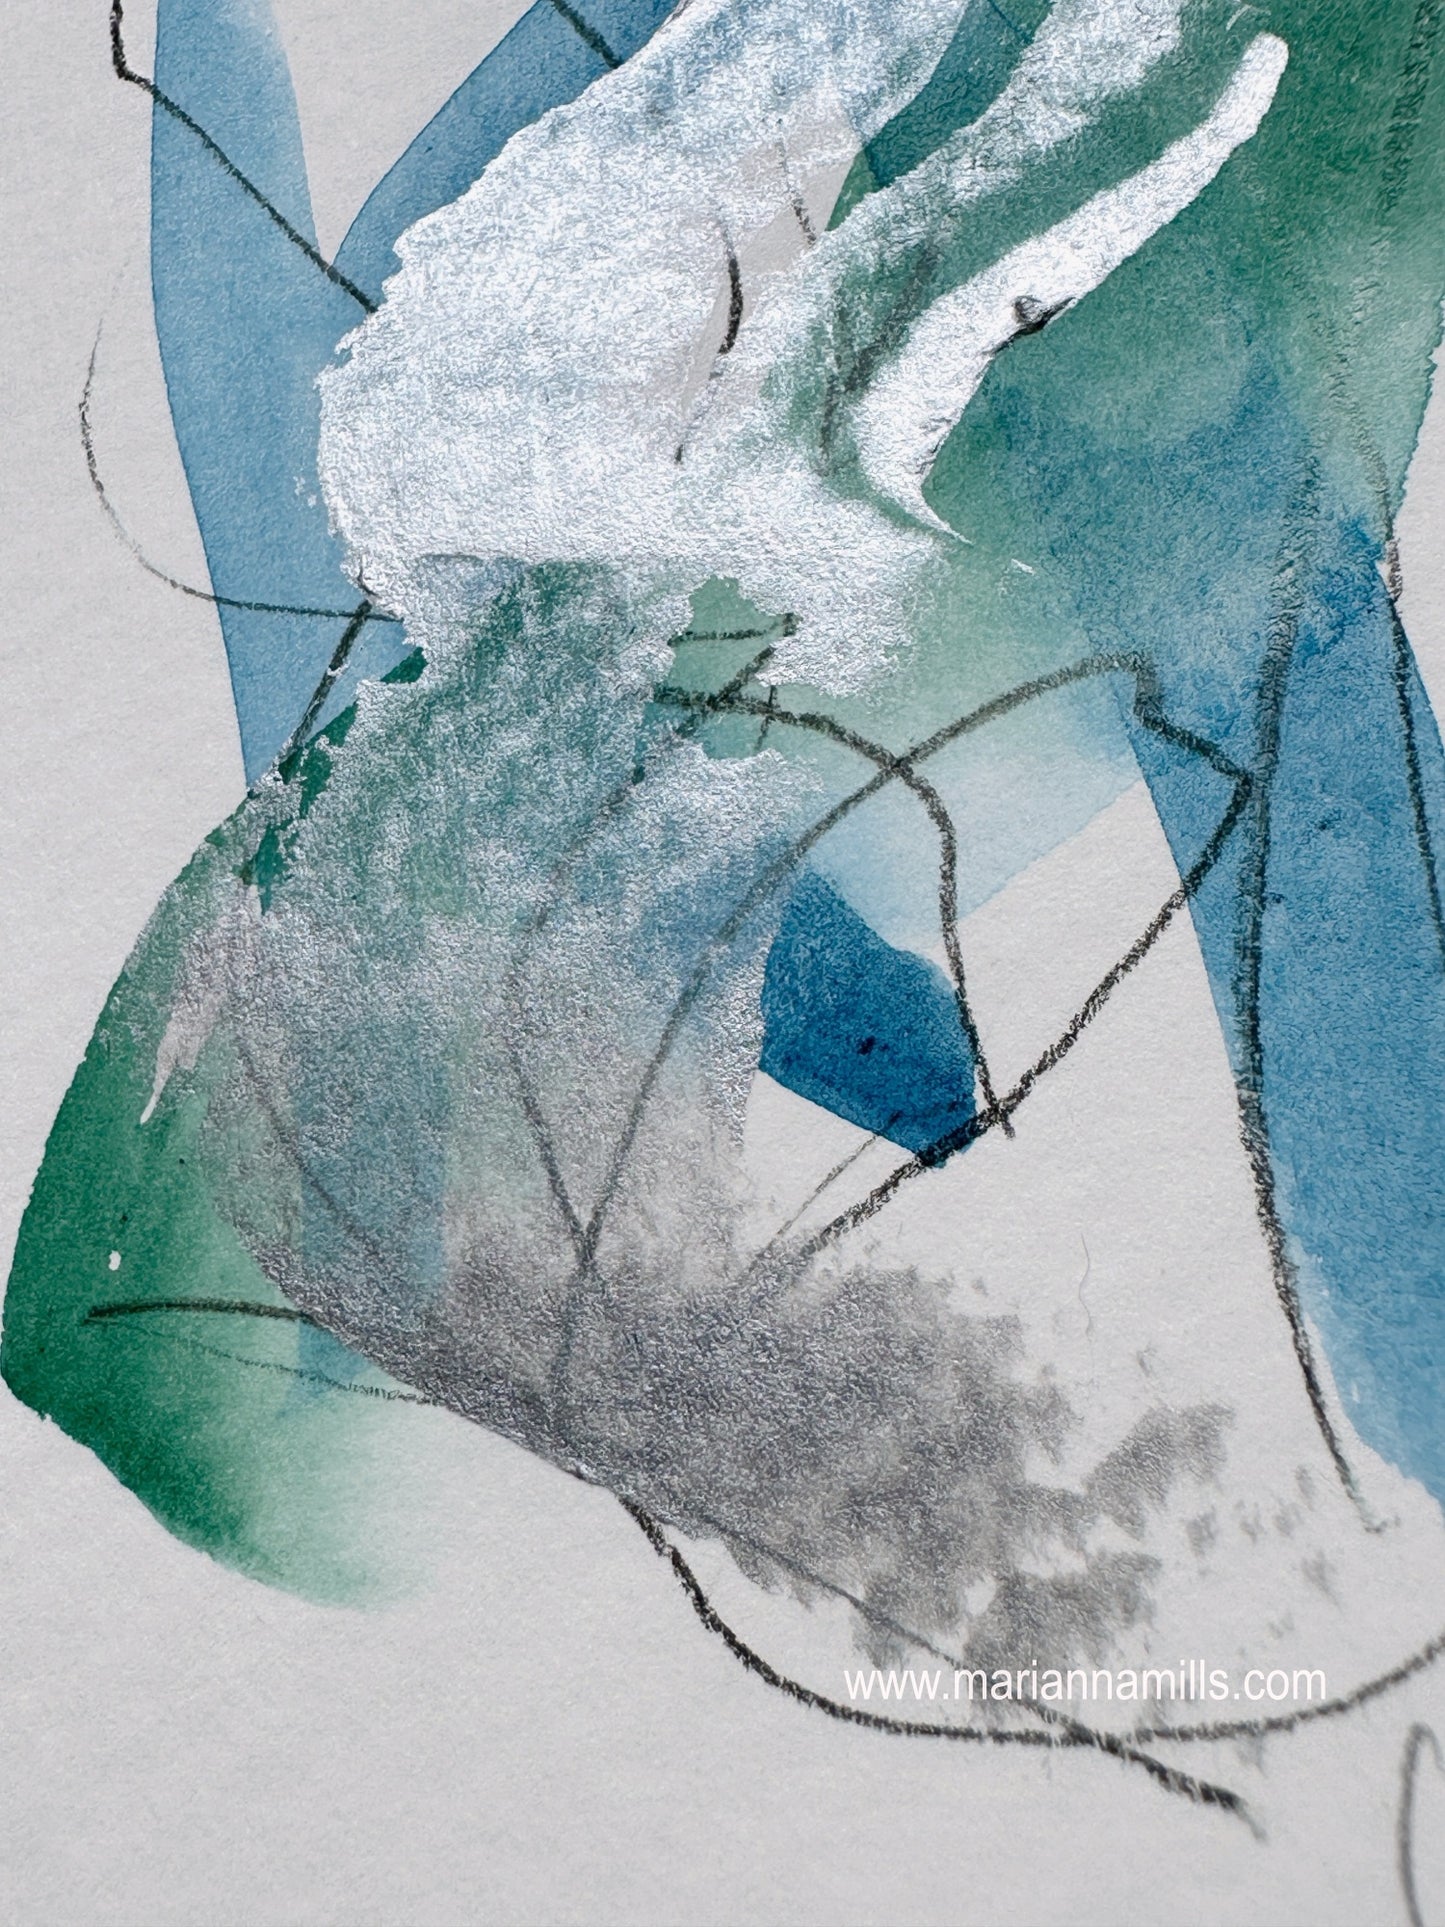 Dove Vol. 2 4"x6" by Marianna Mills. mixed media abstract painting. watercolor, acrylic. blue and green shades